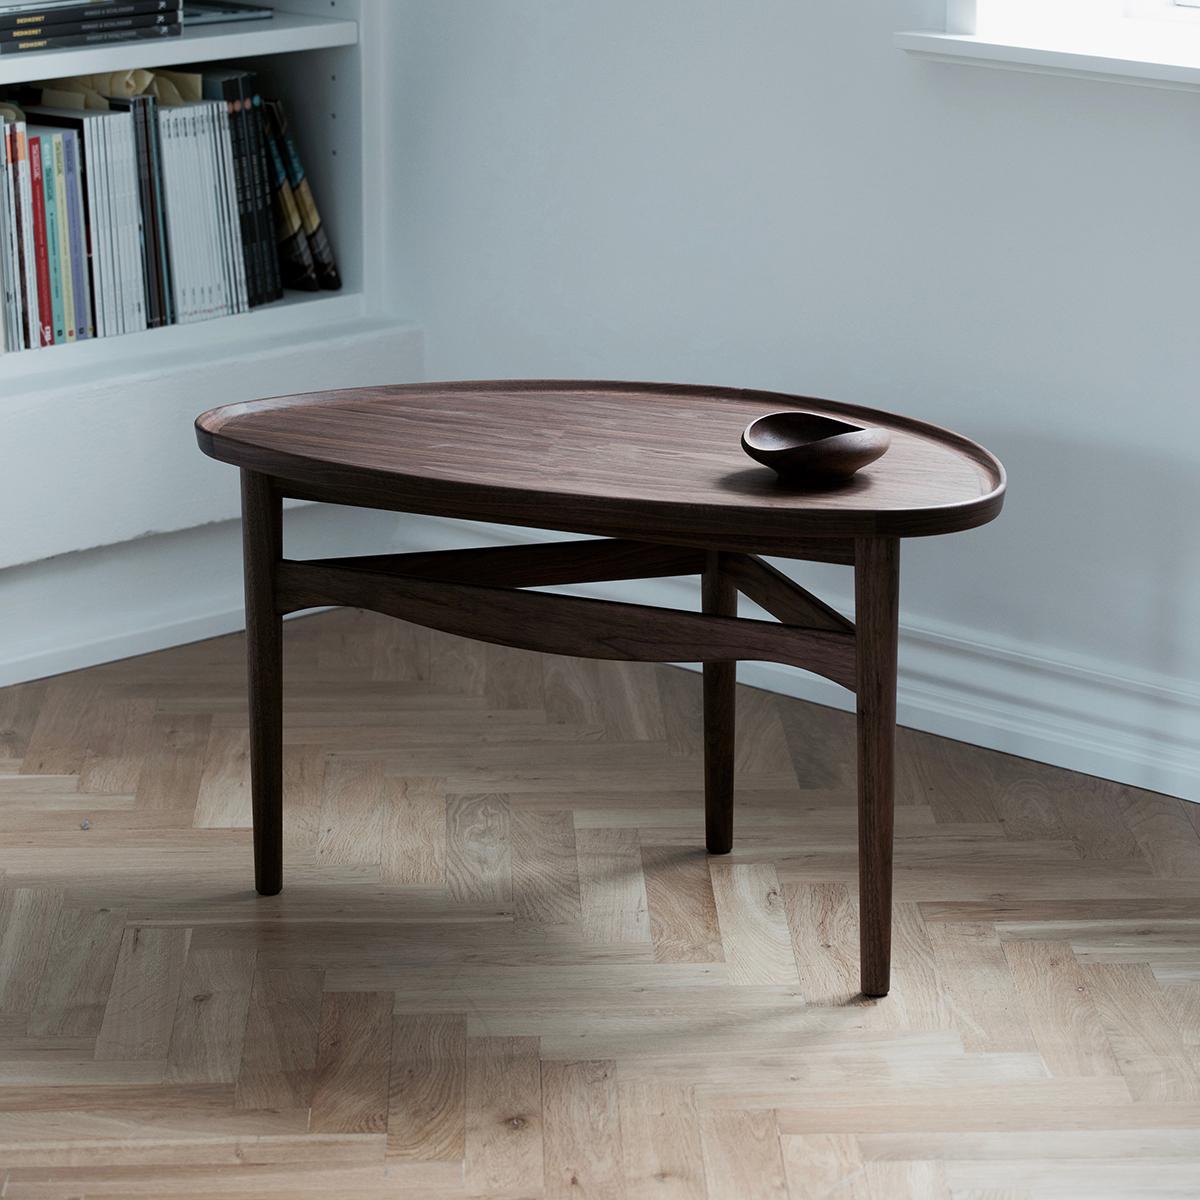 Table designed by Finn Juhl in 1948, relaunched in 2008.
Manufactured by House of Finn Juhl in Denmark.
Bowl is not included.

This eye-shaped, three-legged table was originally designed to match the 46 Sofa.

The shape of the table fits